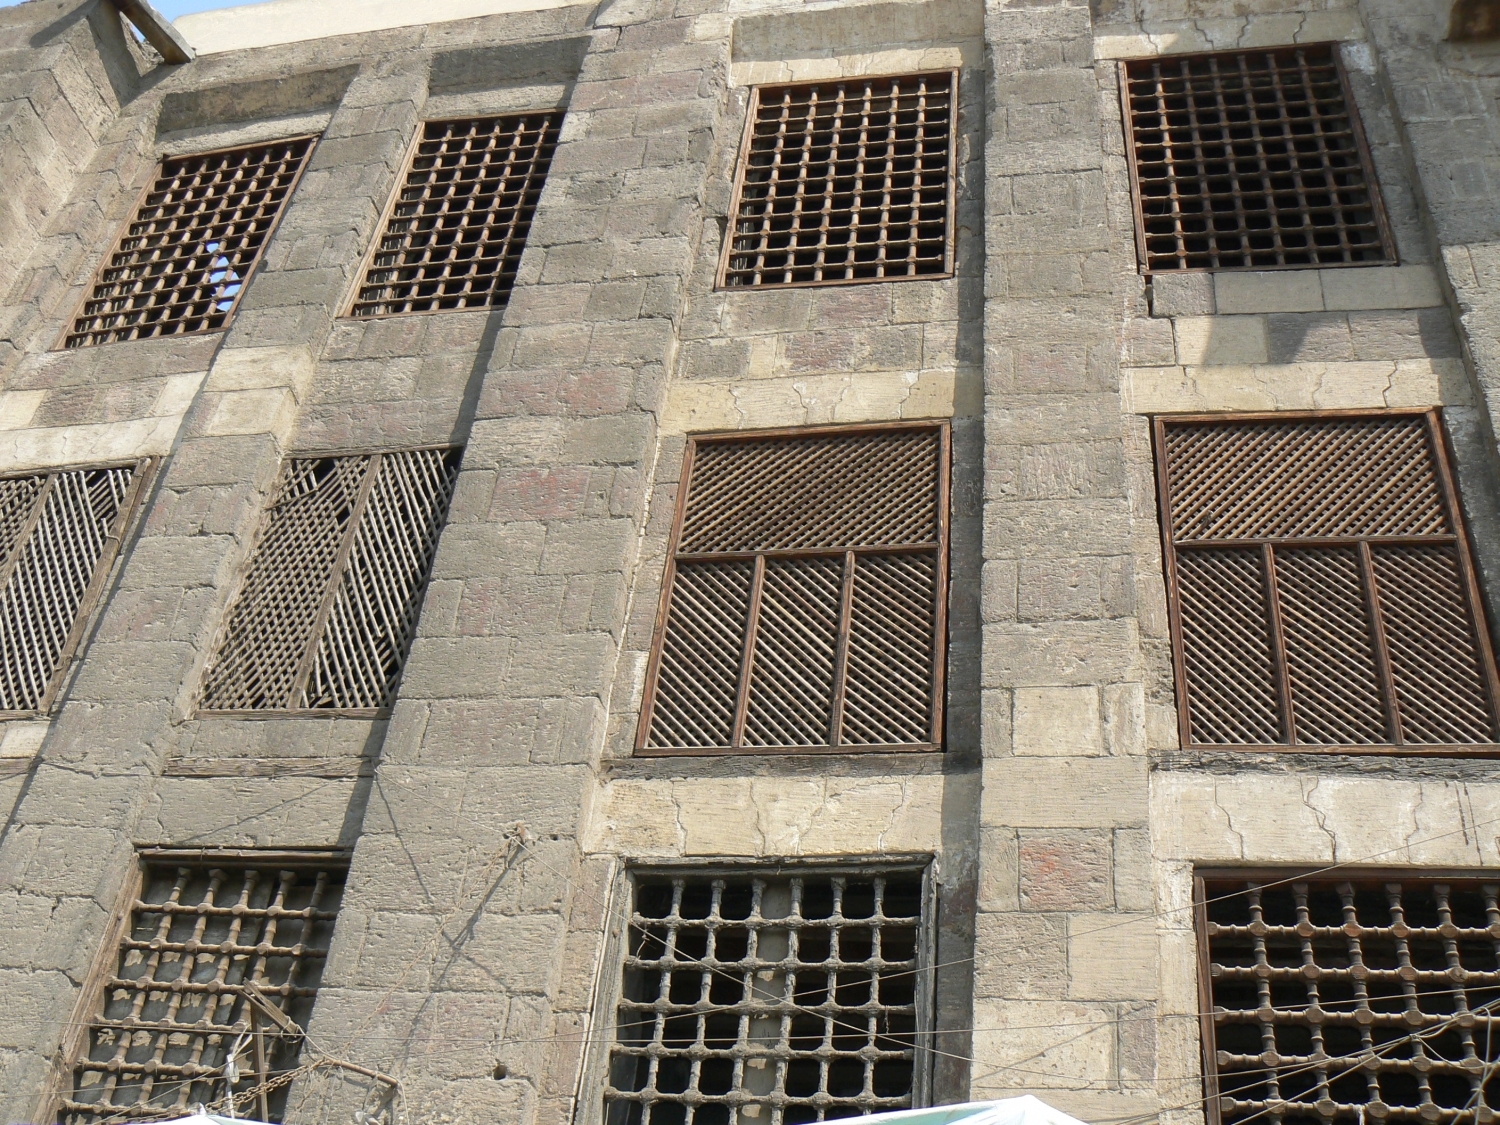 Grille and lattice windows on the front façade